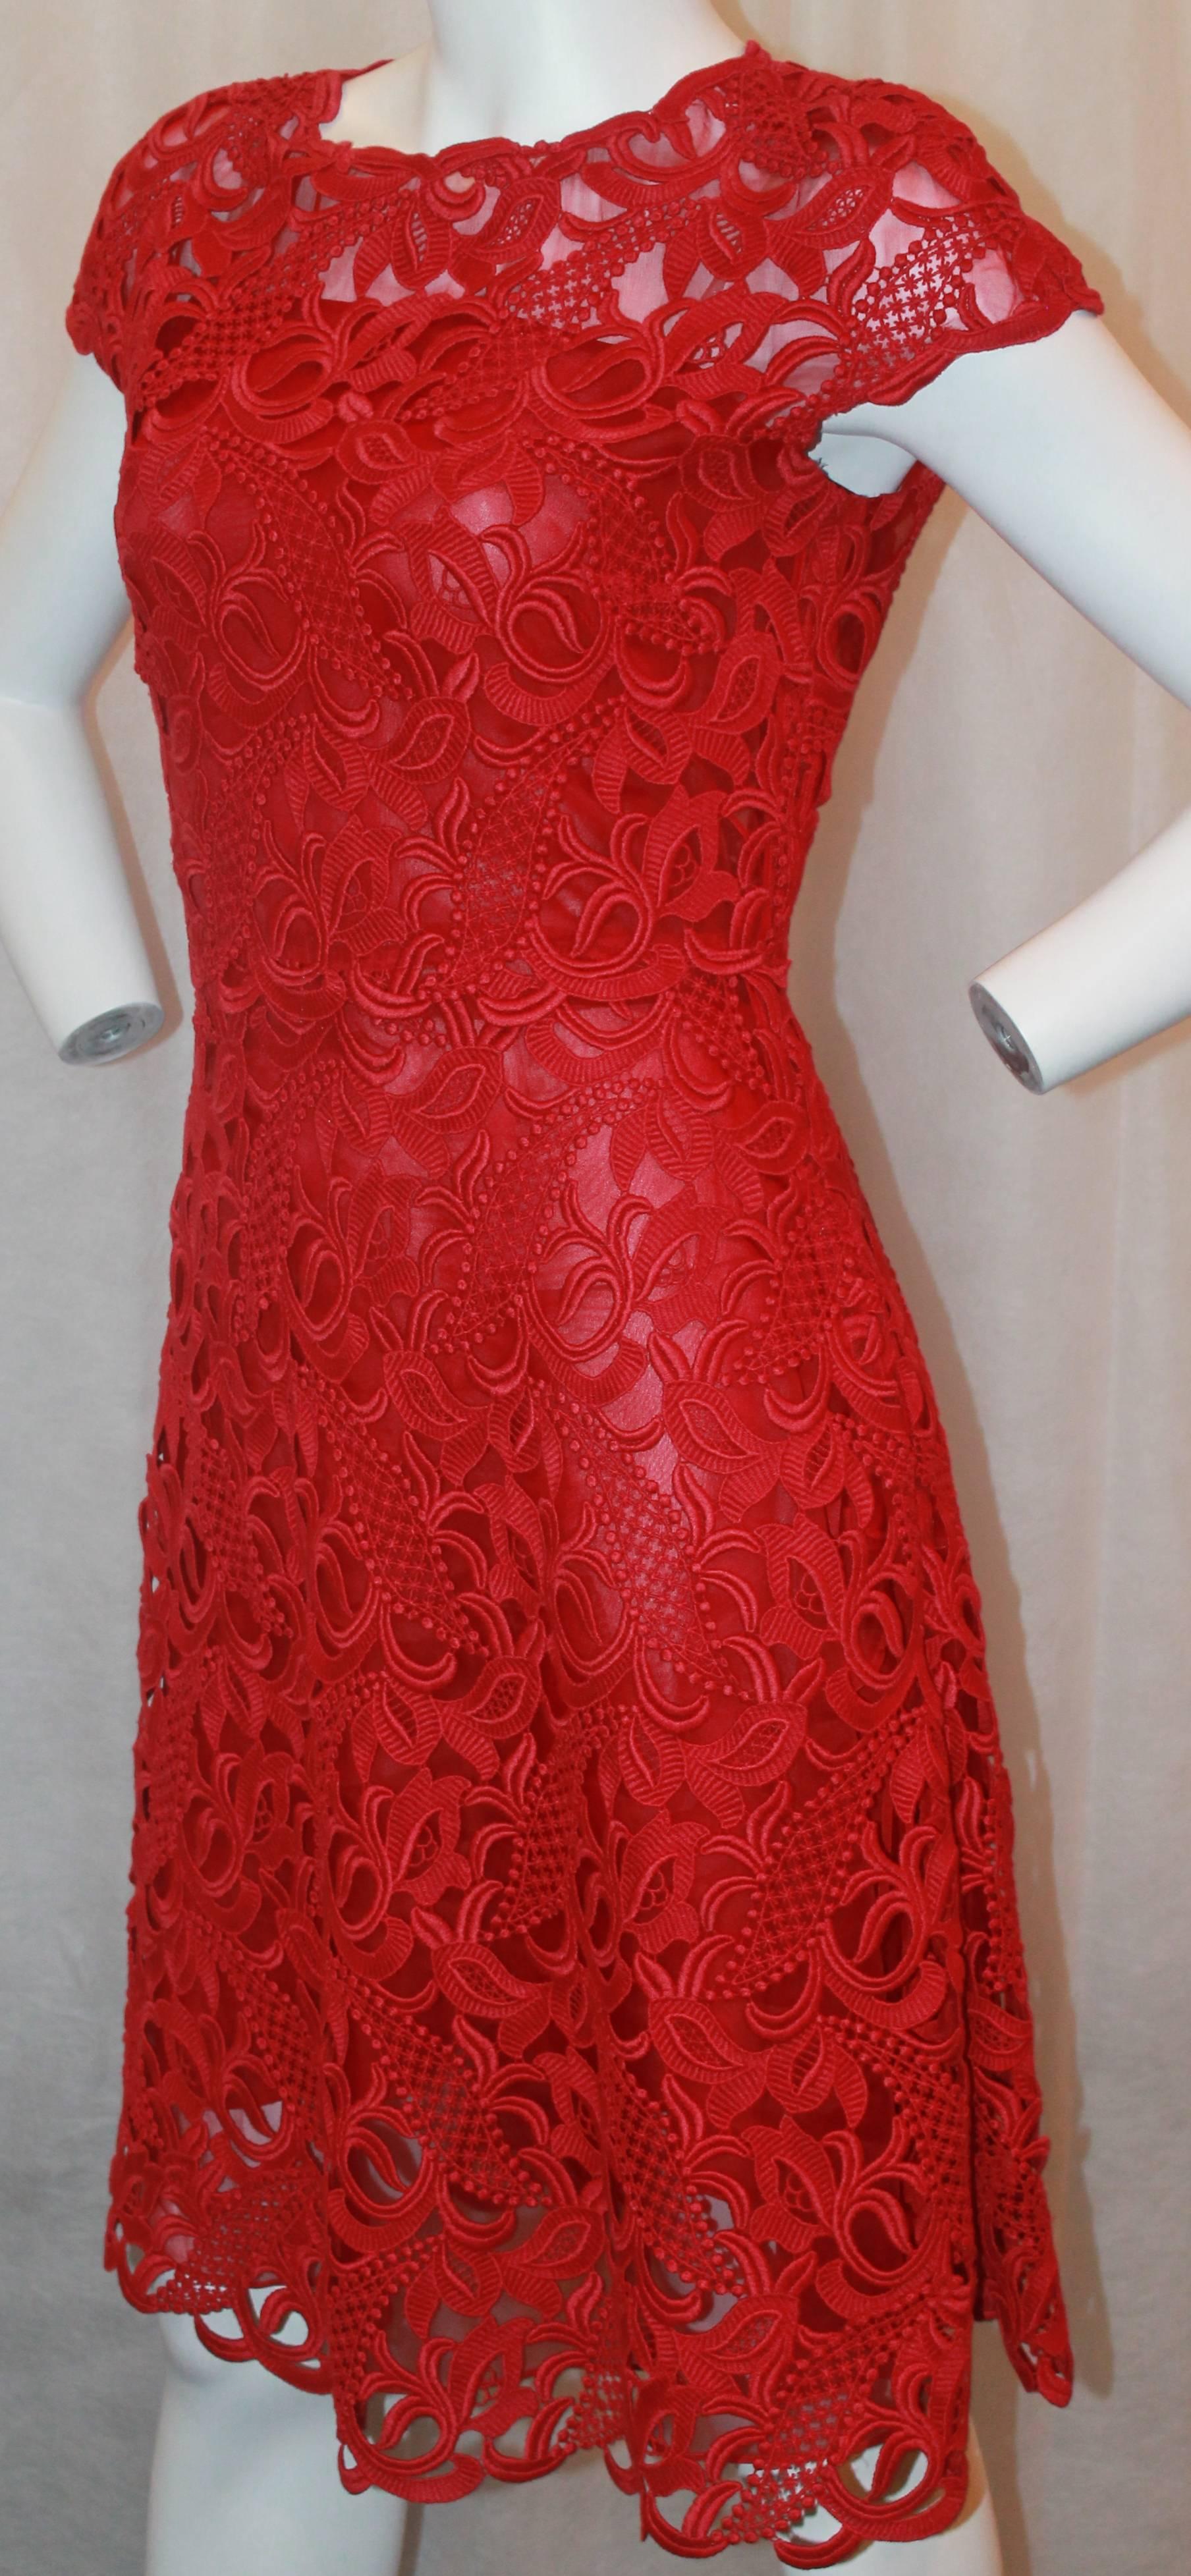 Valentino Red Soutache Lace Dress  - Small.  This stunning dress is in excellent condition.  It features an elegant and intricate soutache lace, short sleeves, round neckline, fitted torso, A-line skirt and a silk slip underneath.  It is very